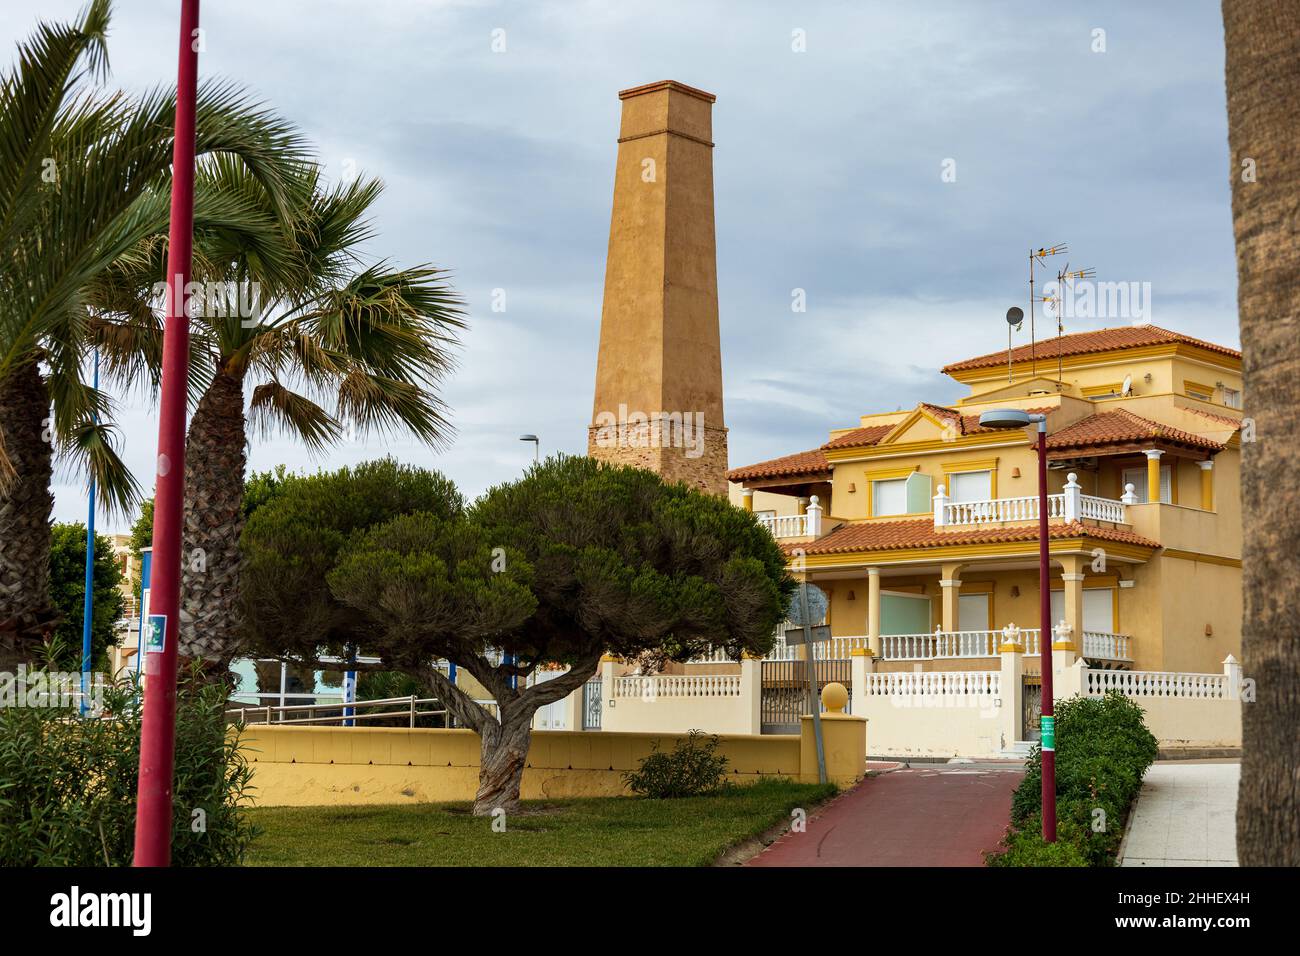 Large Holiday Home Overlooking the Sea in Garrucha, Almeria province, Andalucía, Spain Stock Photo